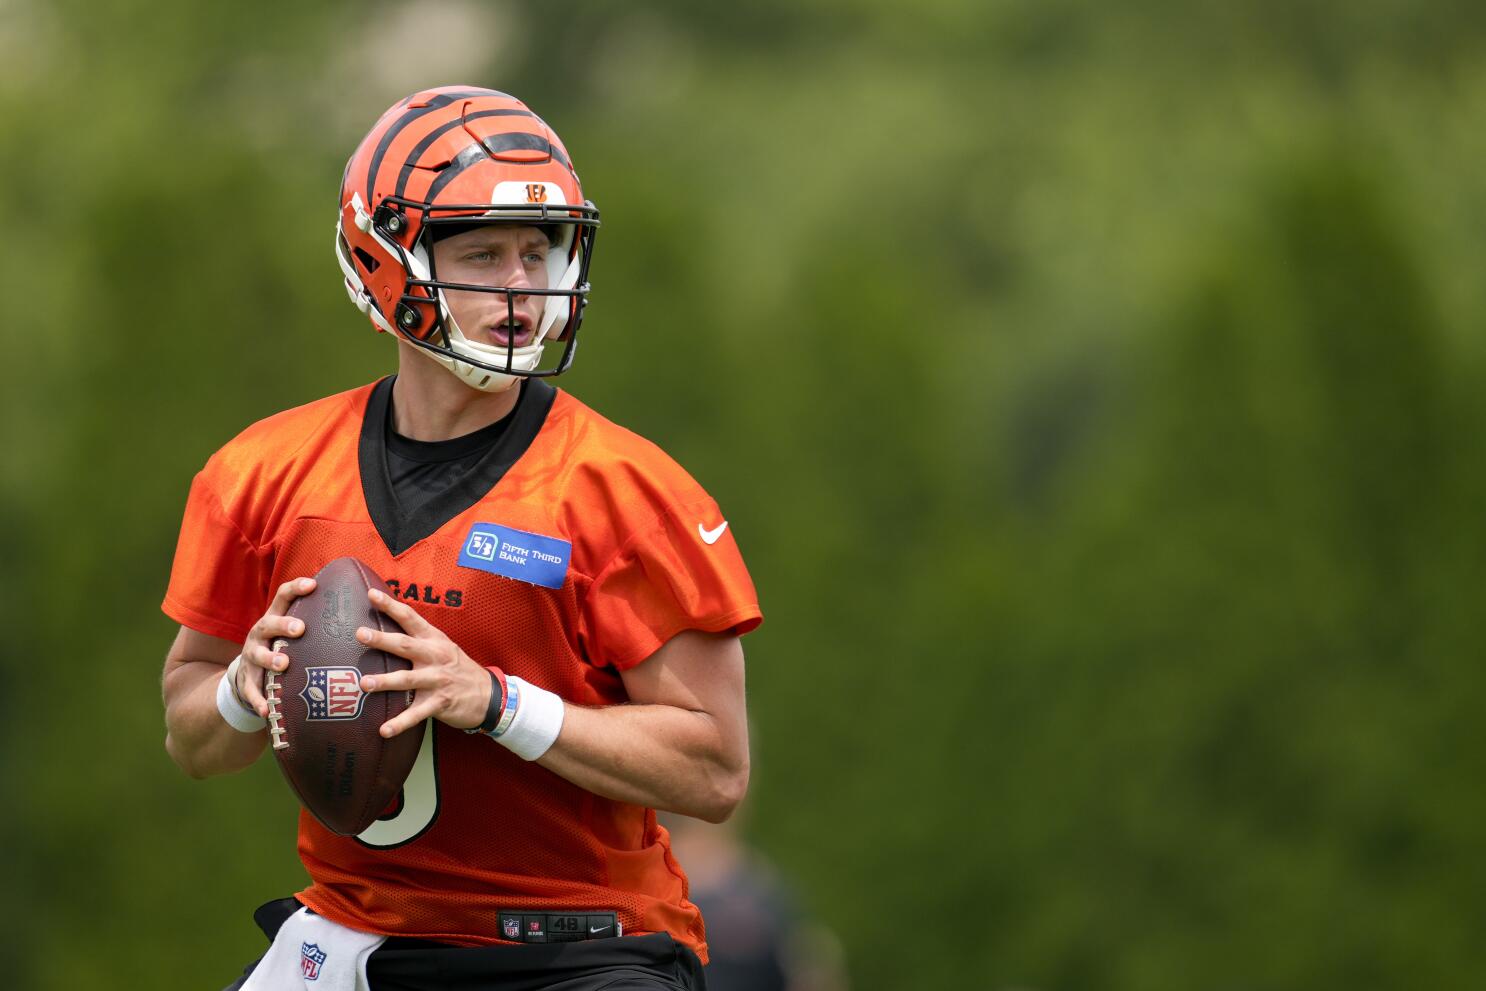 Bengals' Joe Burrow becomes the highest-paid player in NFL history